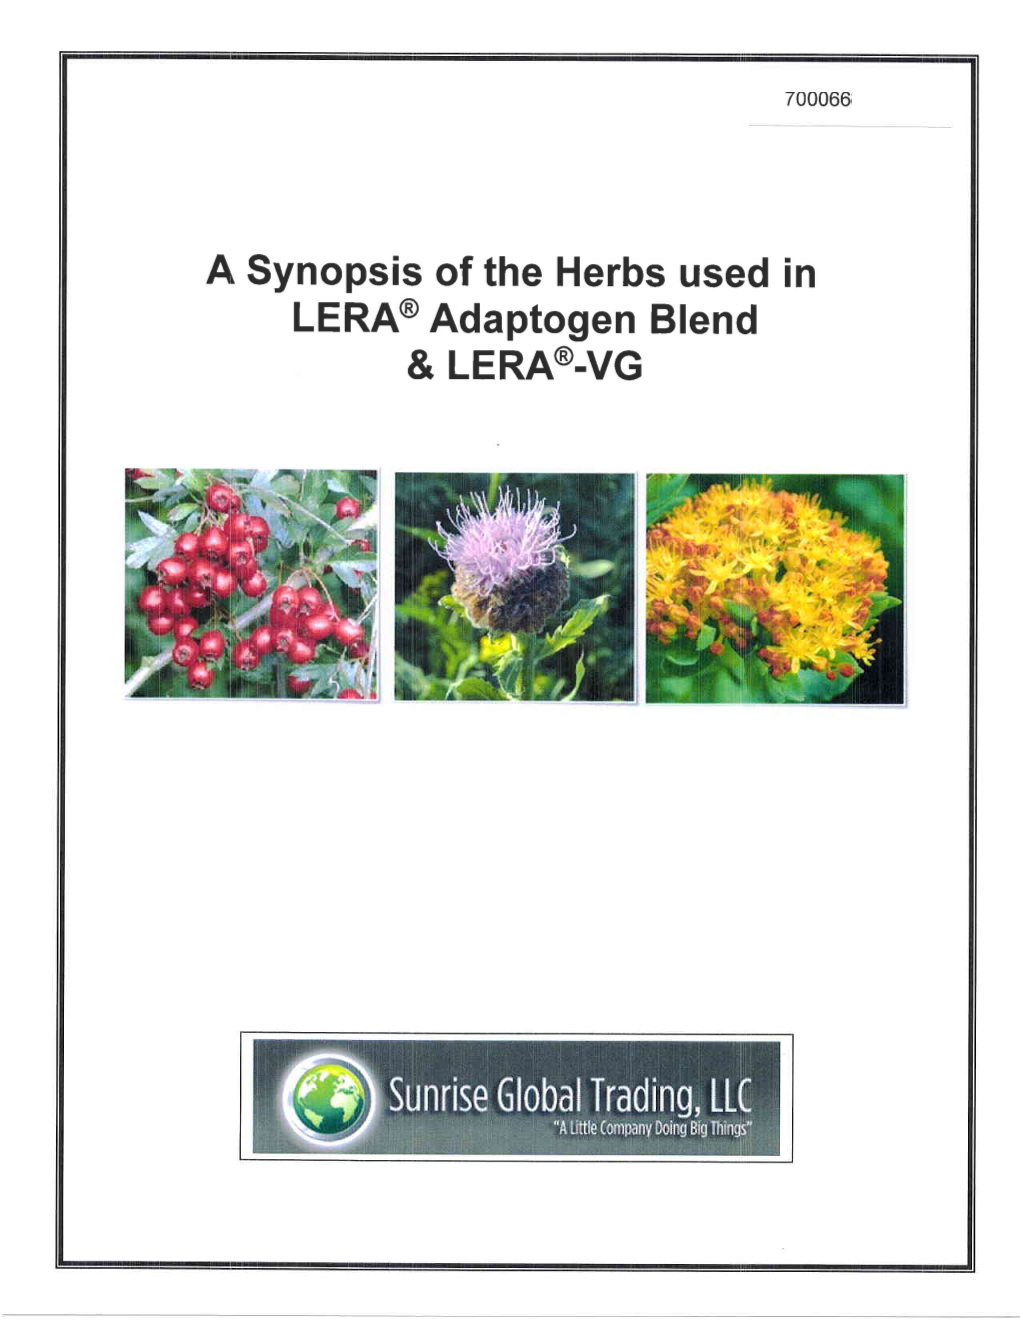 A Synopsis of the Herbs Used in LERA@ Adaptogen Blend & LERA@.VG a Synopsis of the Herbs Used in LERA@ Adaptogen Blend & LERA@-VG